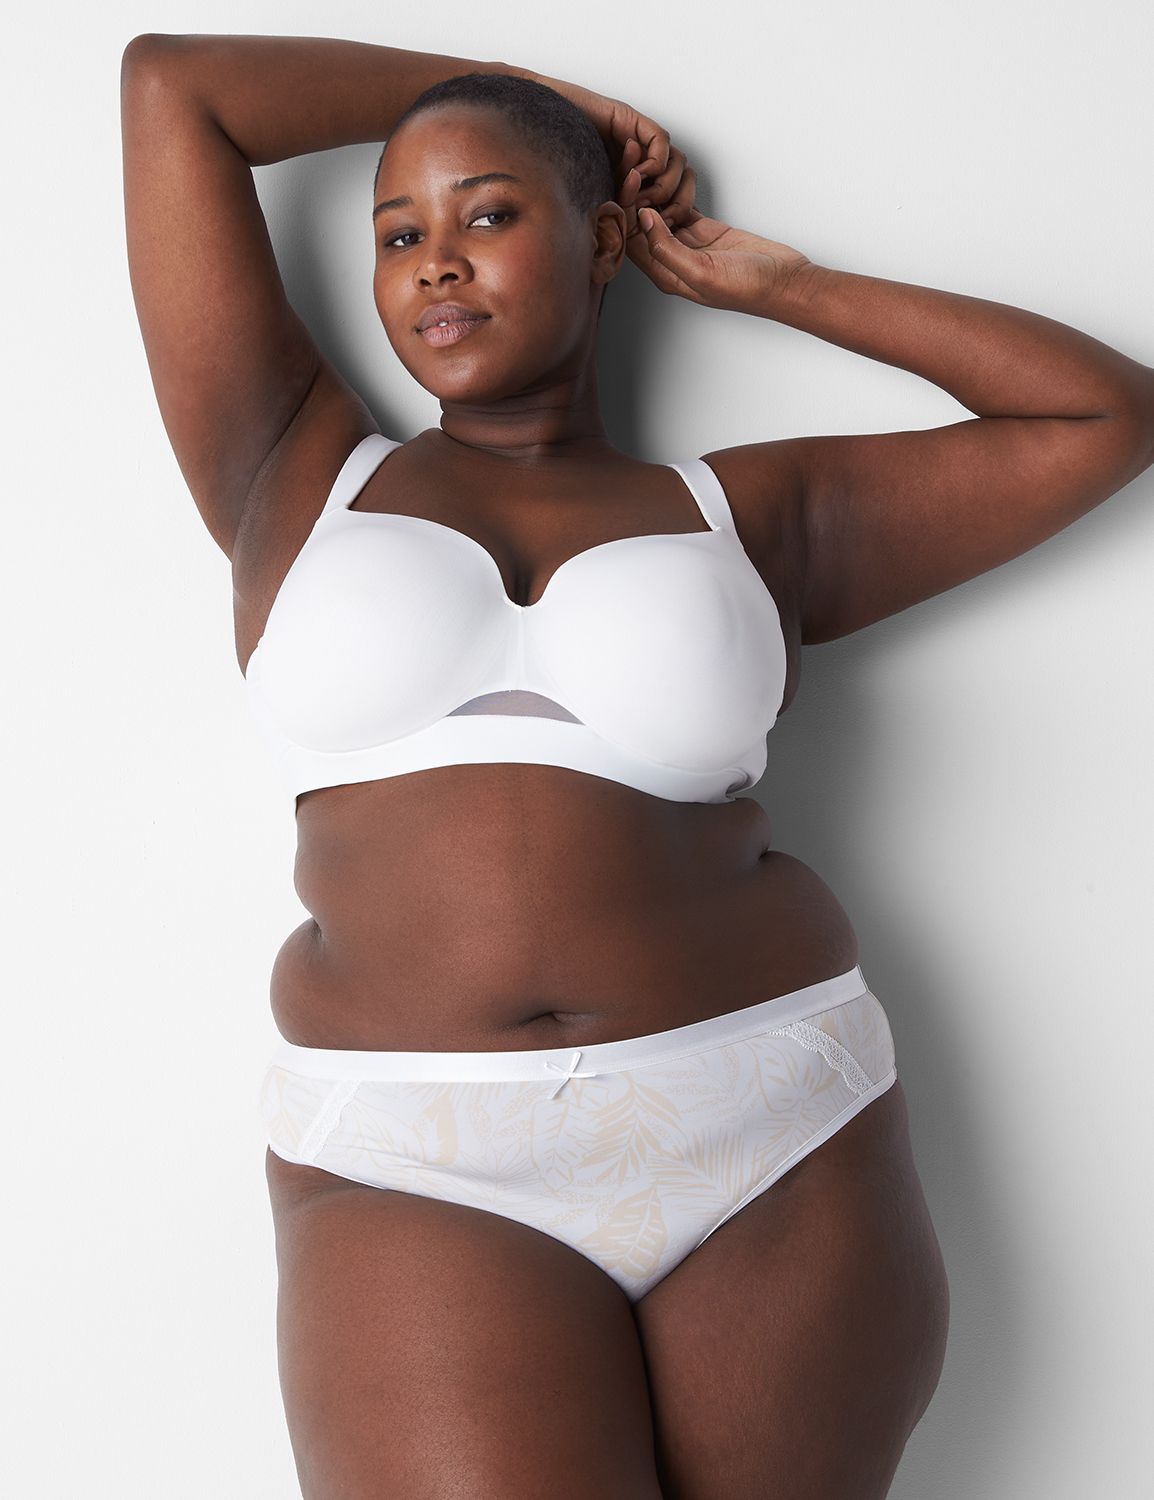 Lane Bryant - Oh, yeah! 7/$35 panties are back — but only for two